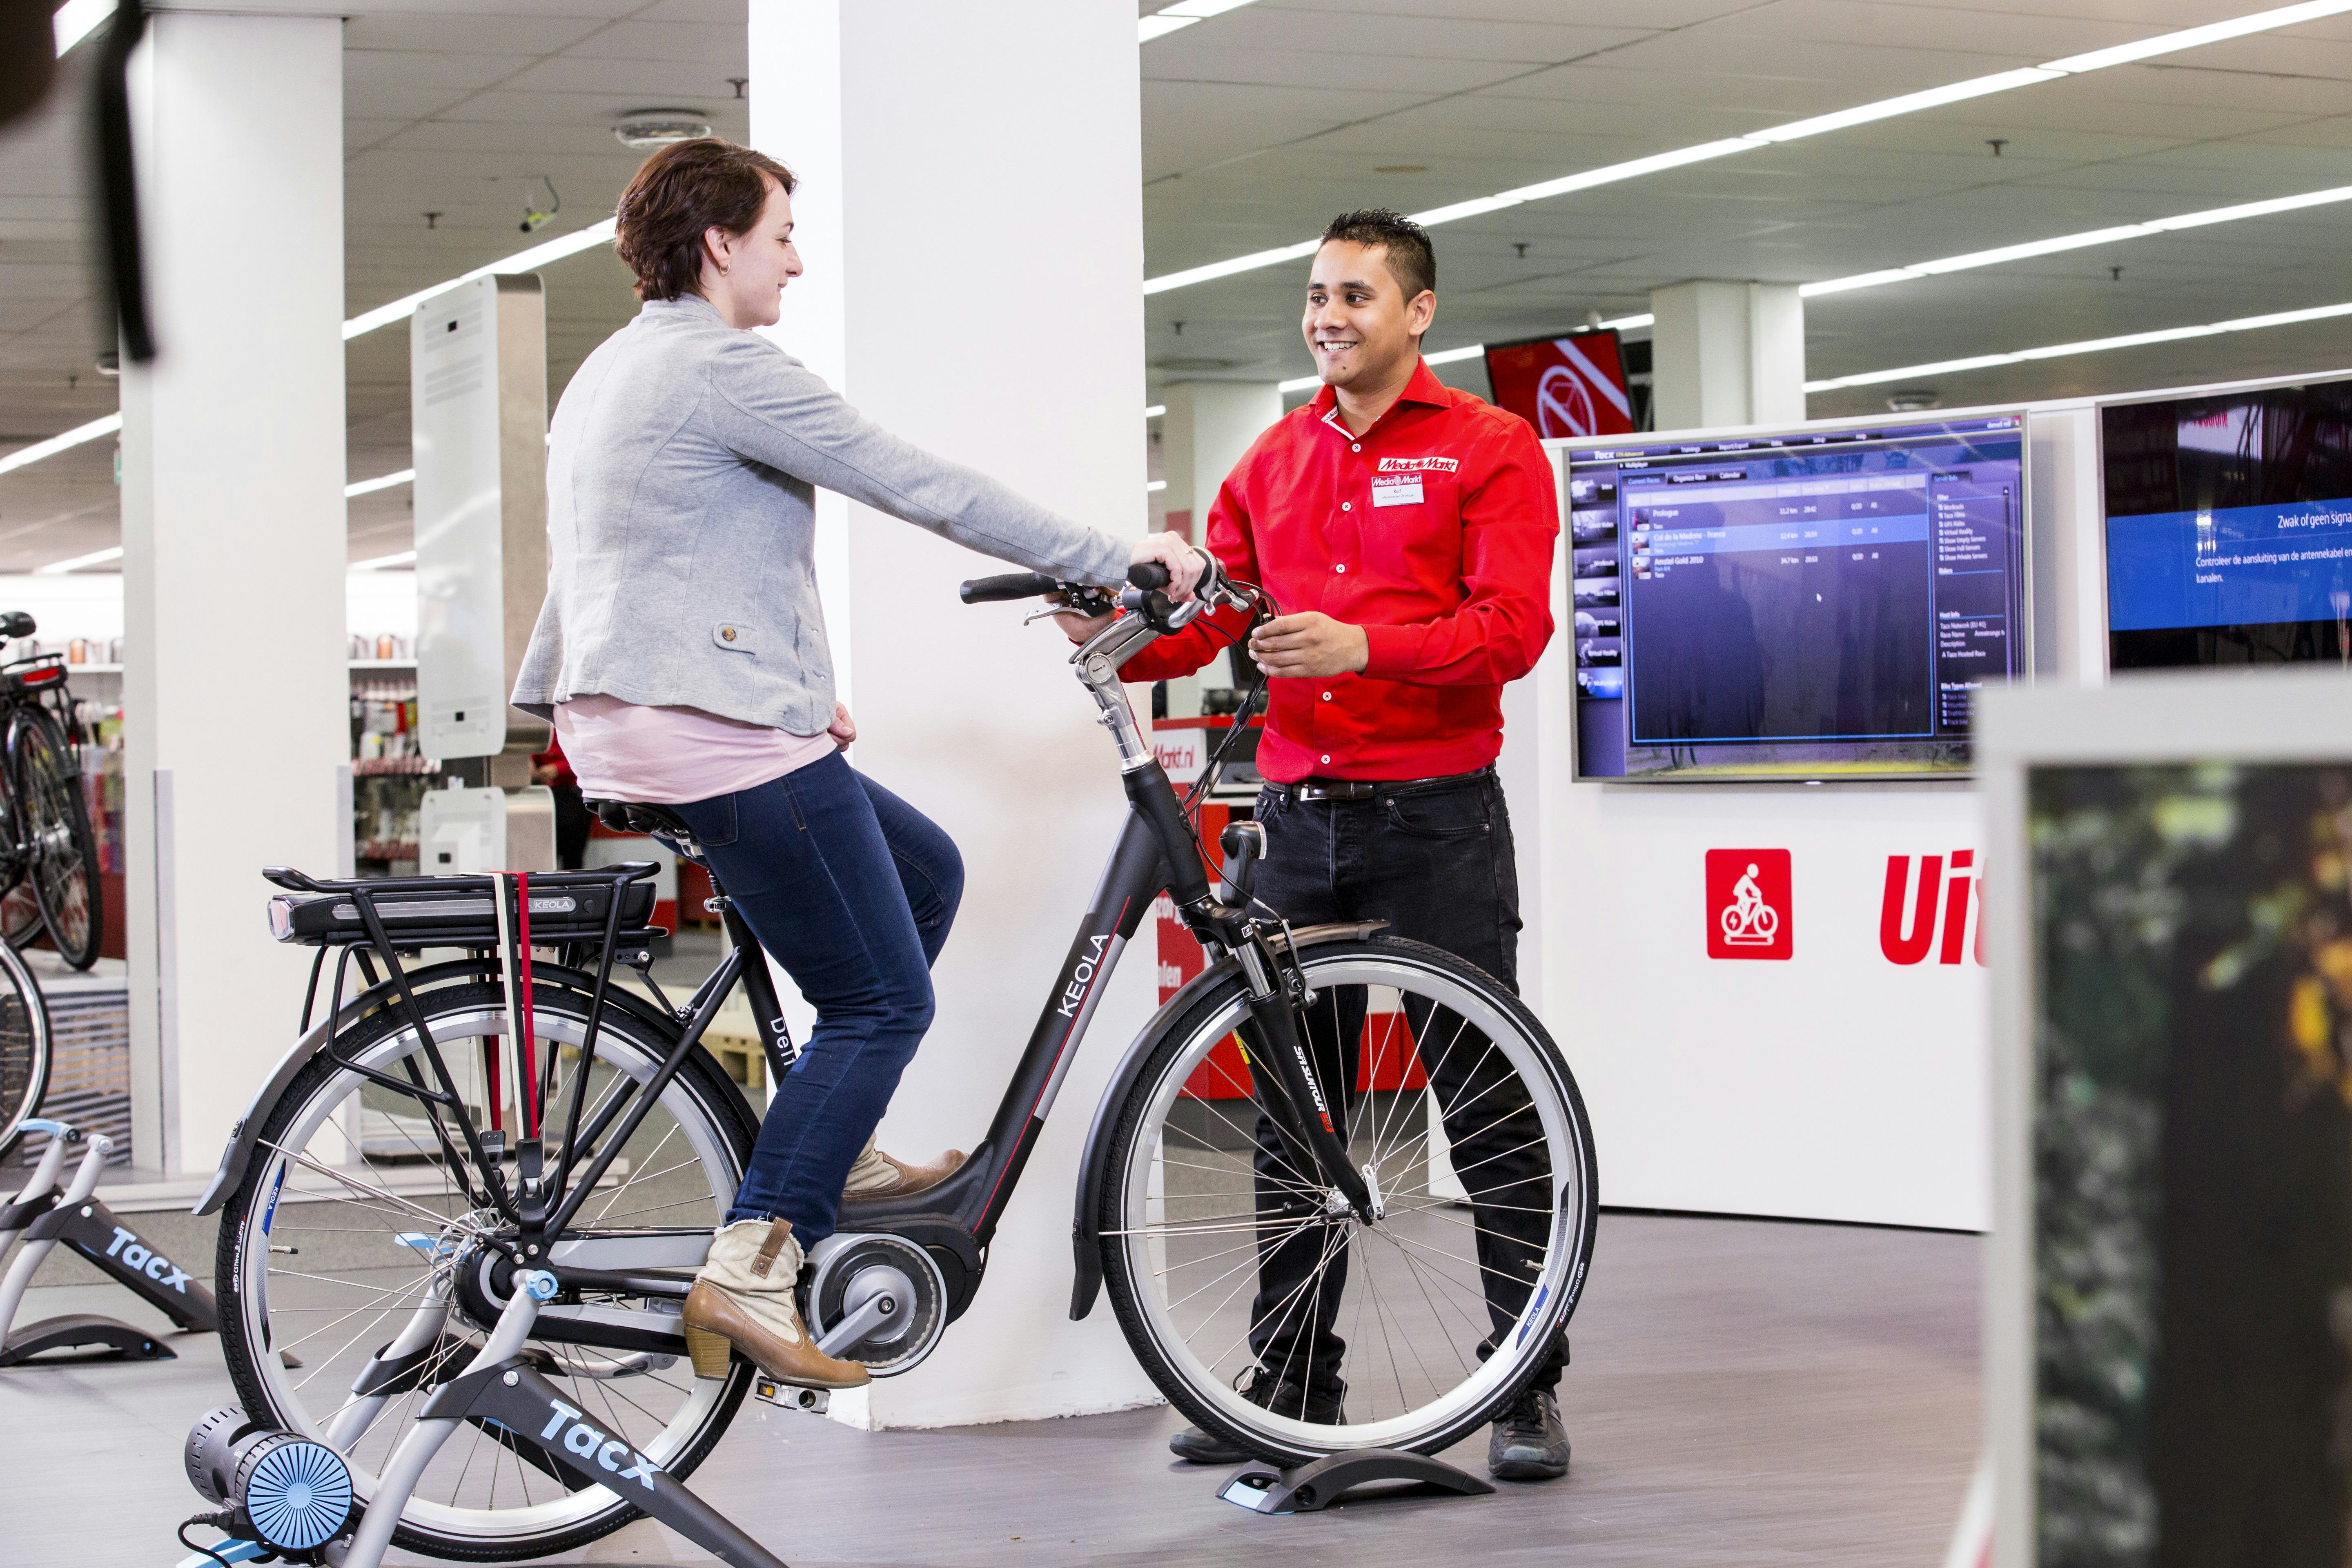 Sale of e-bikes in the city bike category increased turnover-wise by 44 percent in first quarter of 2019. – Photo Bike Europe